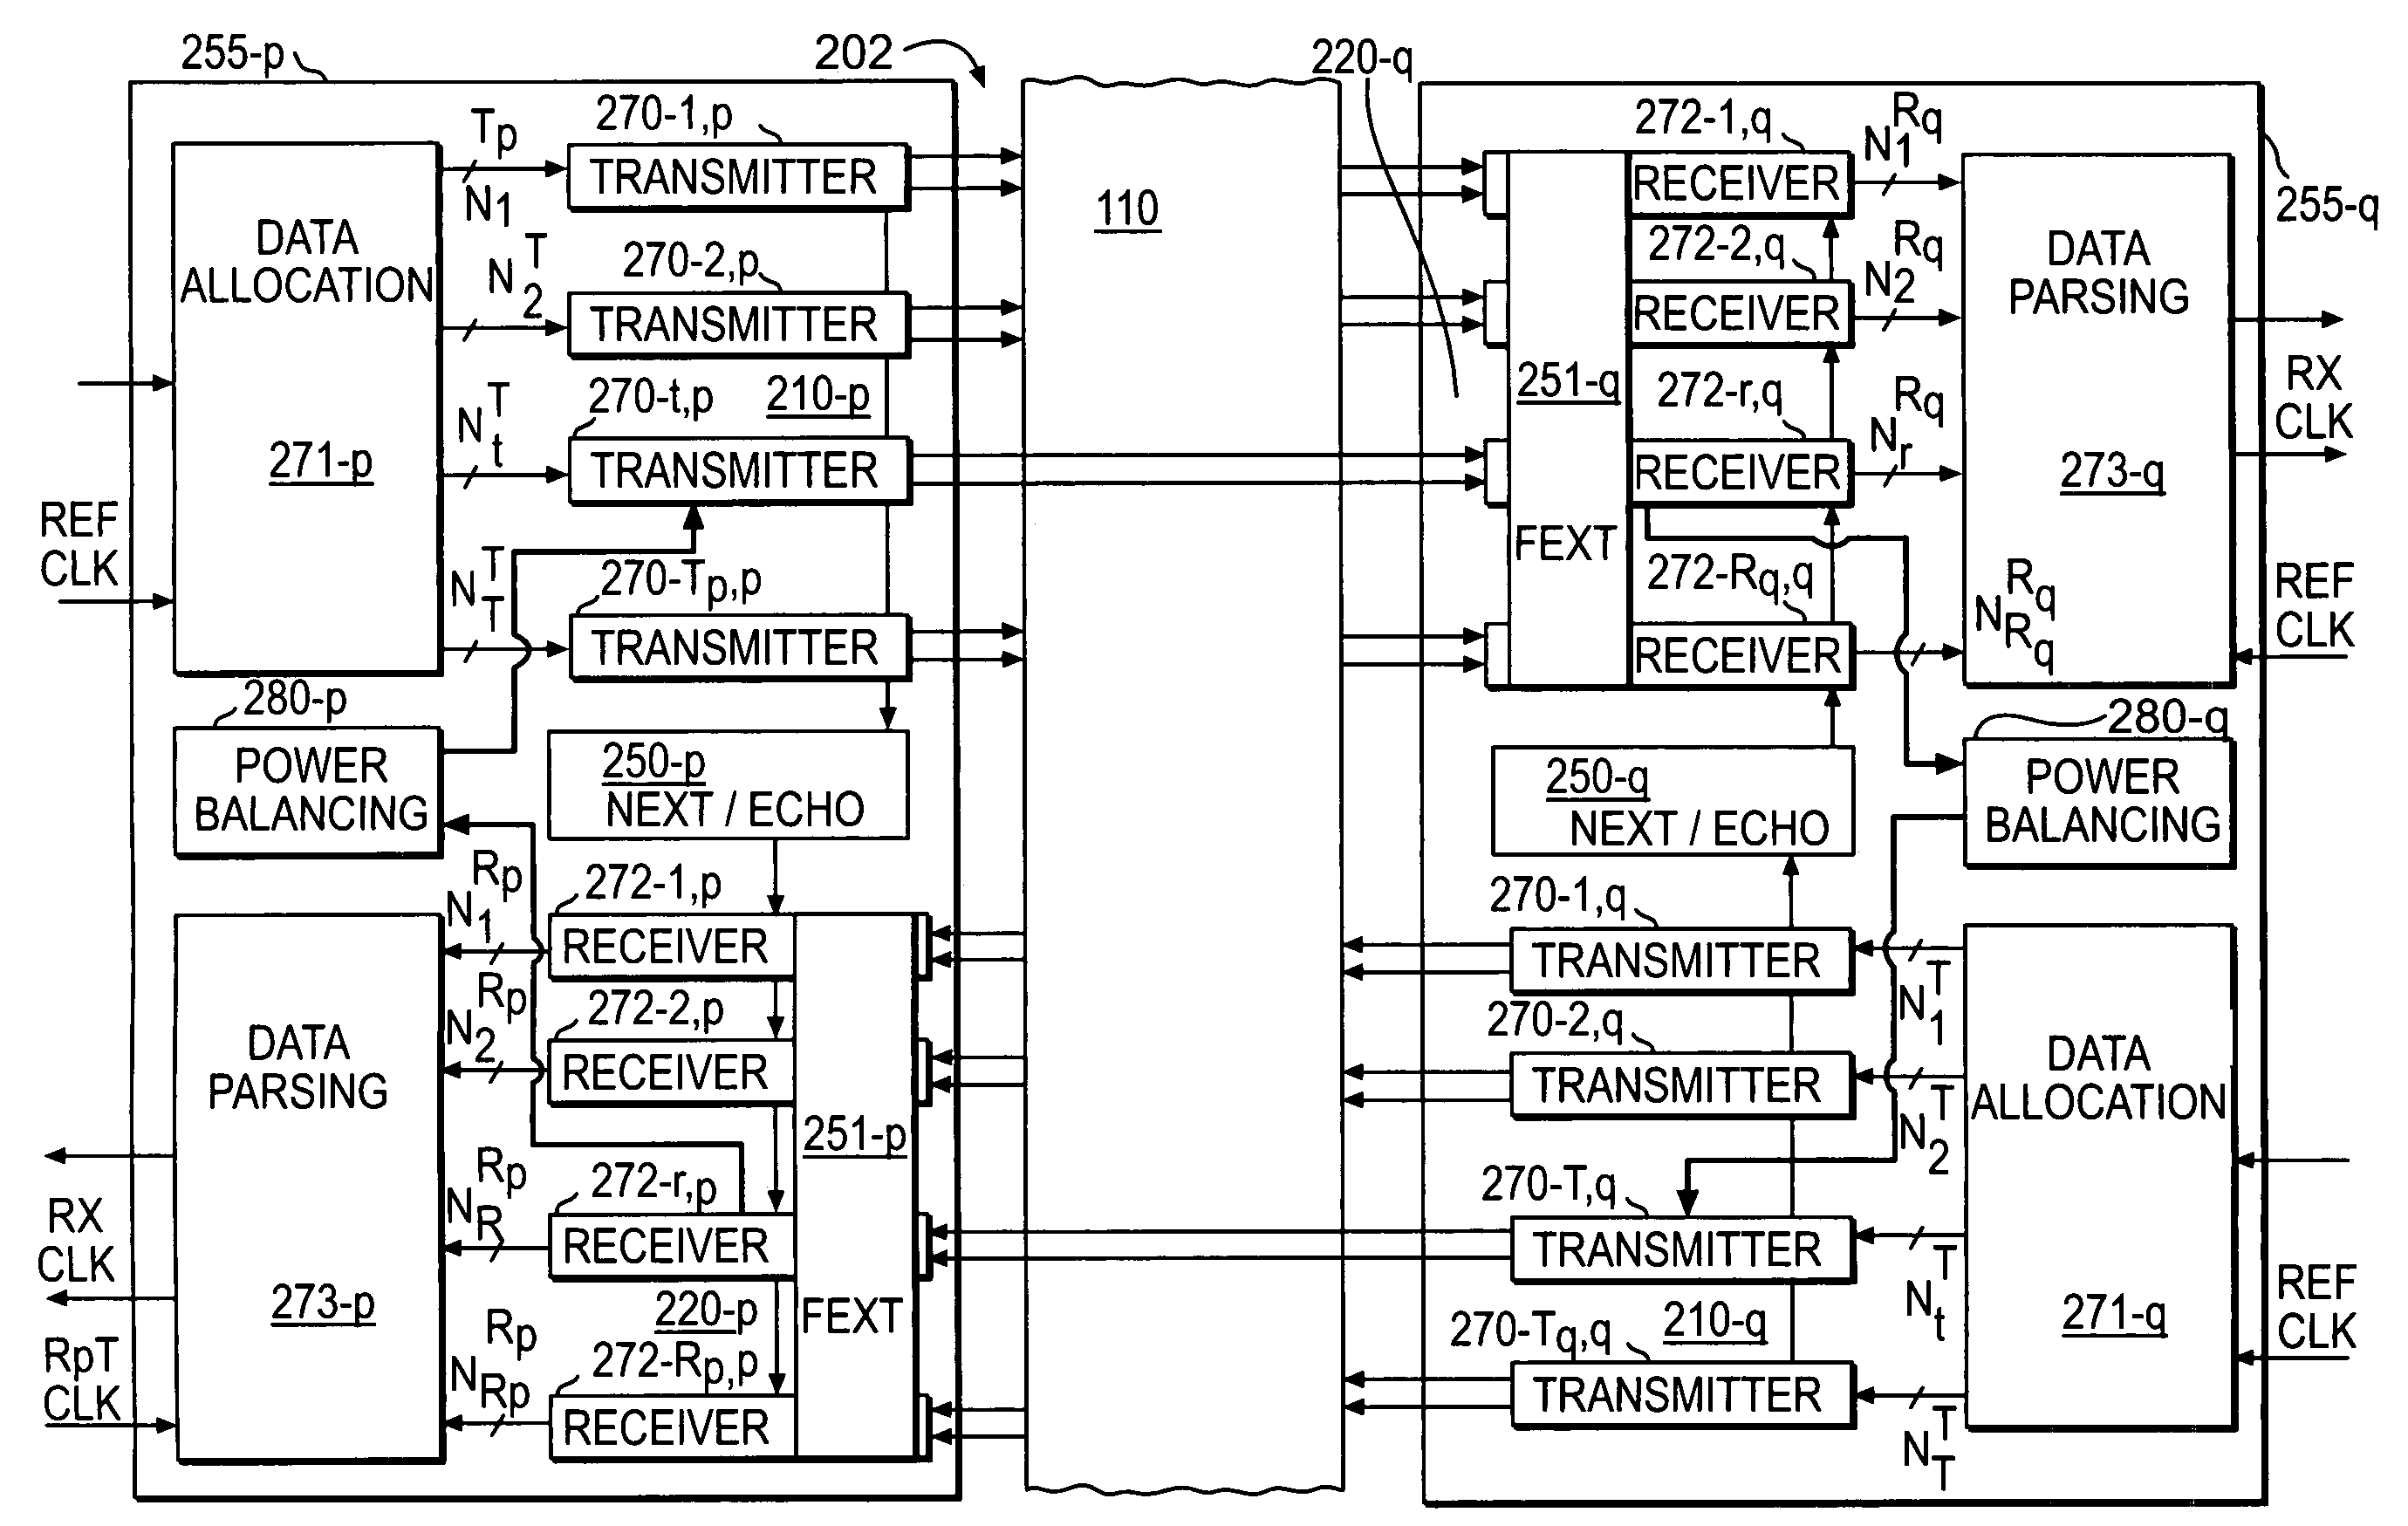 Channel power balancing in a multi-channel transceiver system